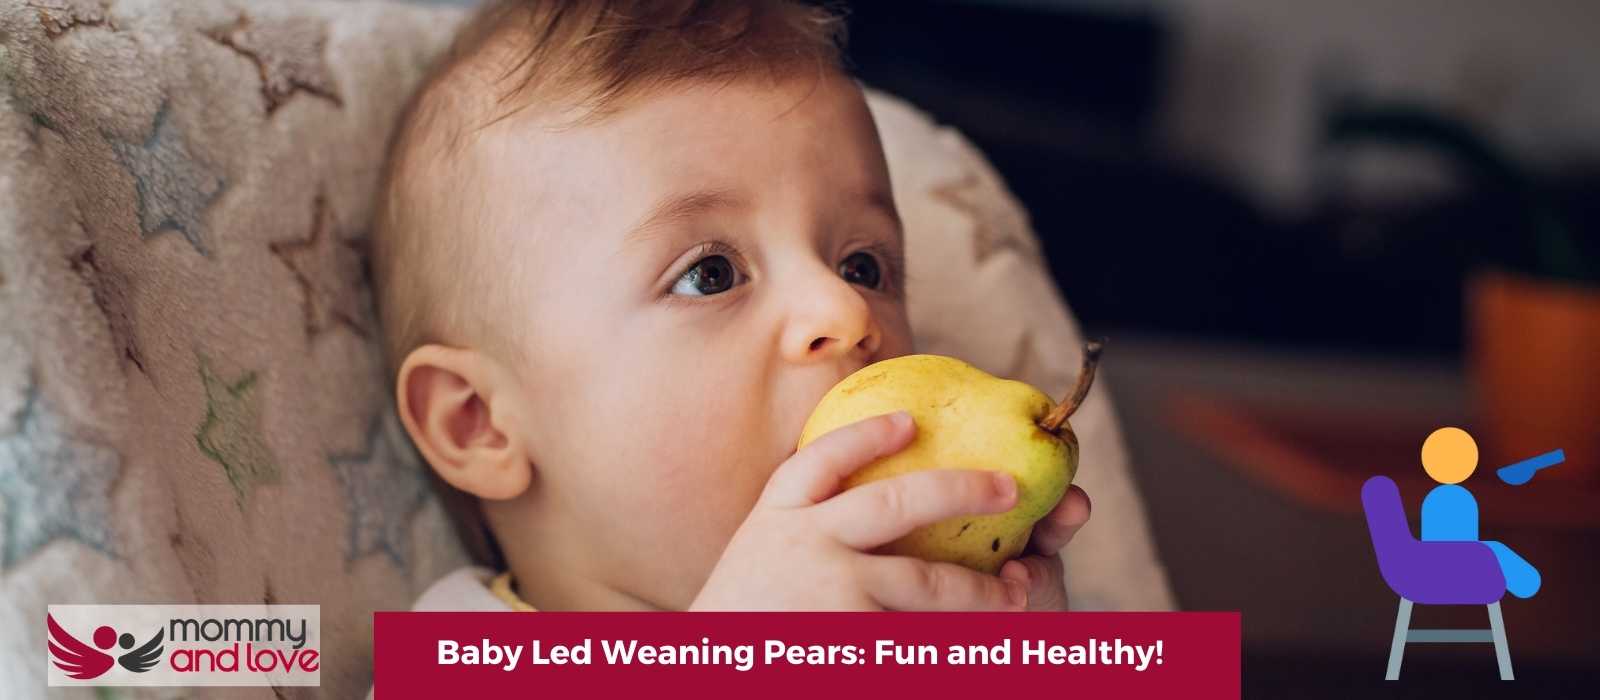 Baby Led Weaning Pears Fun and Healthy!